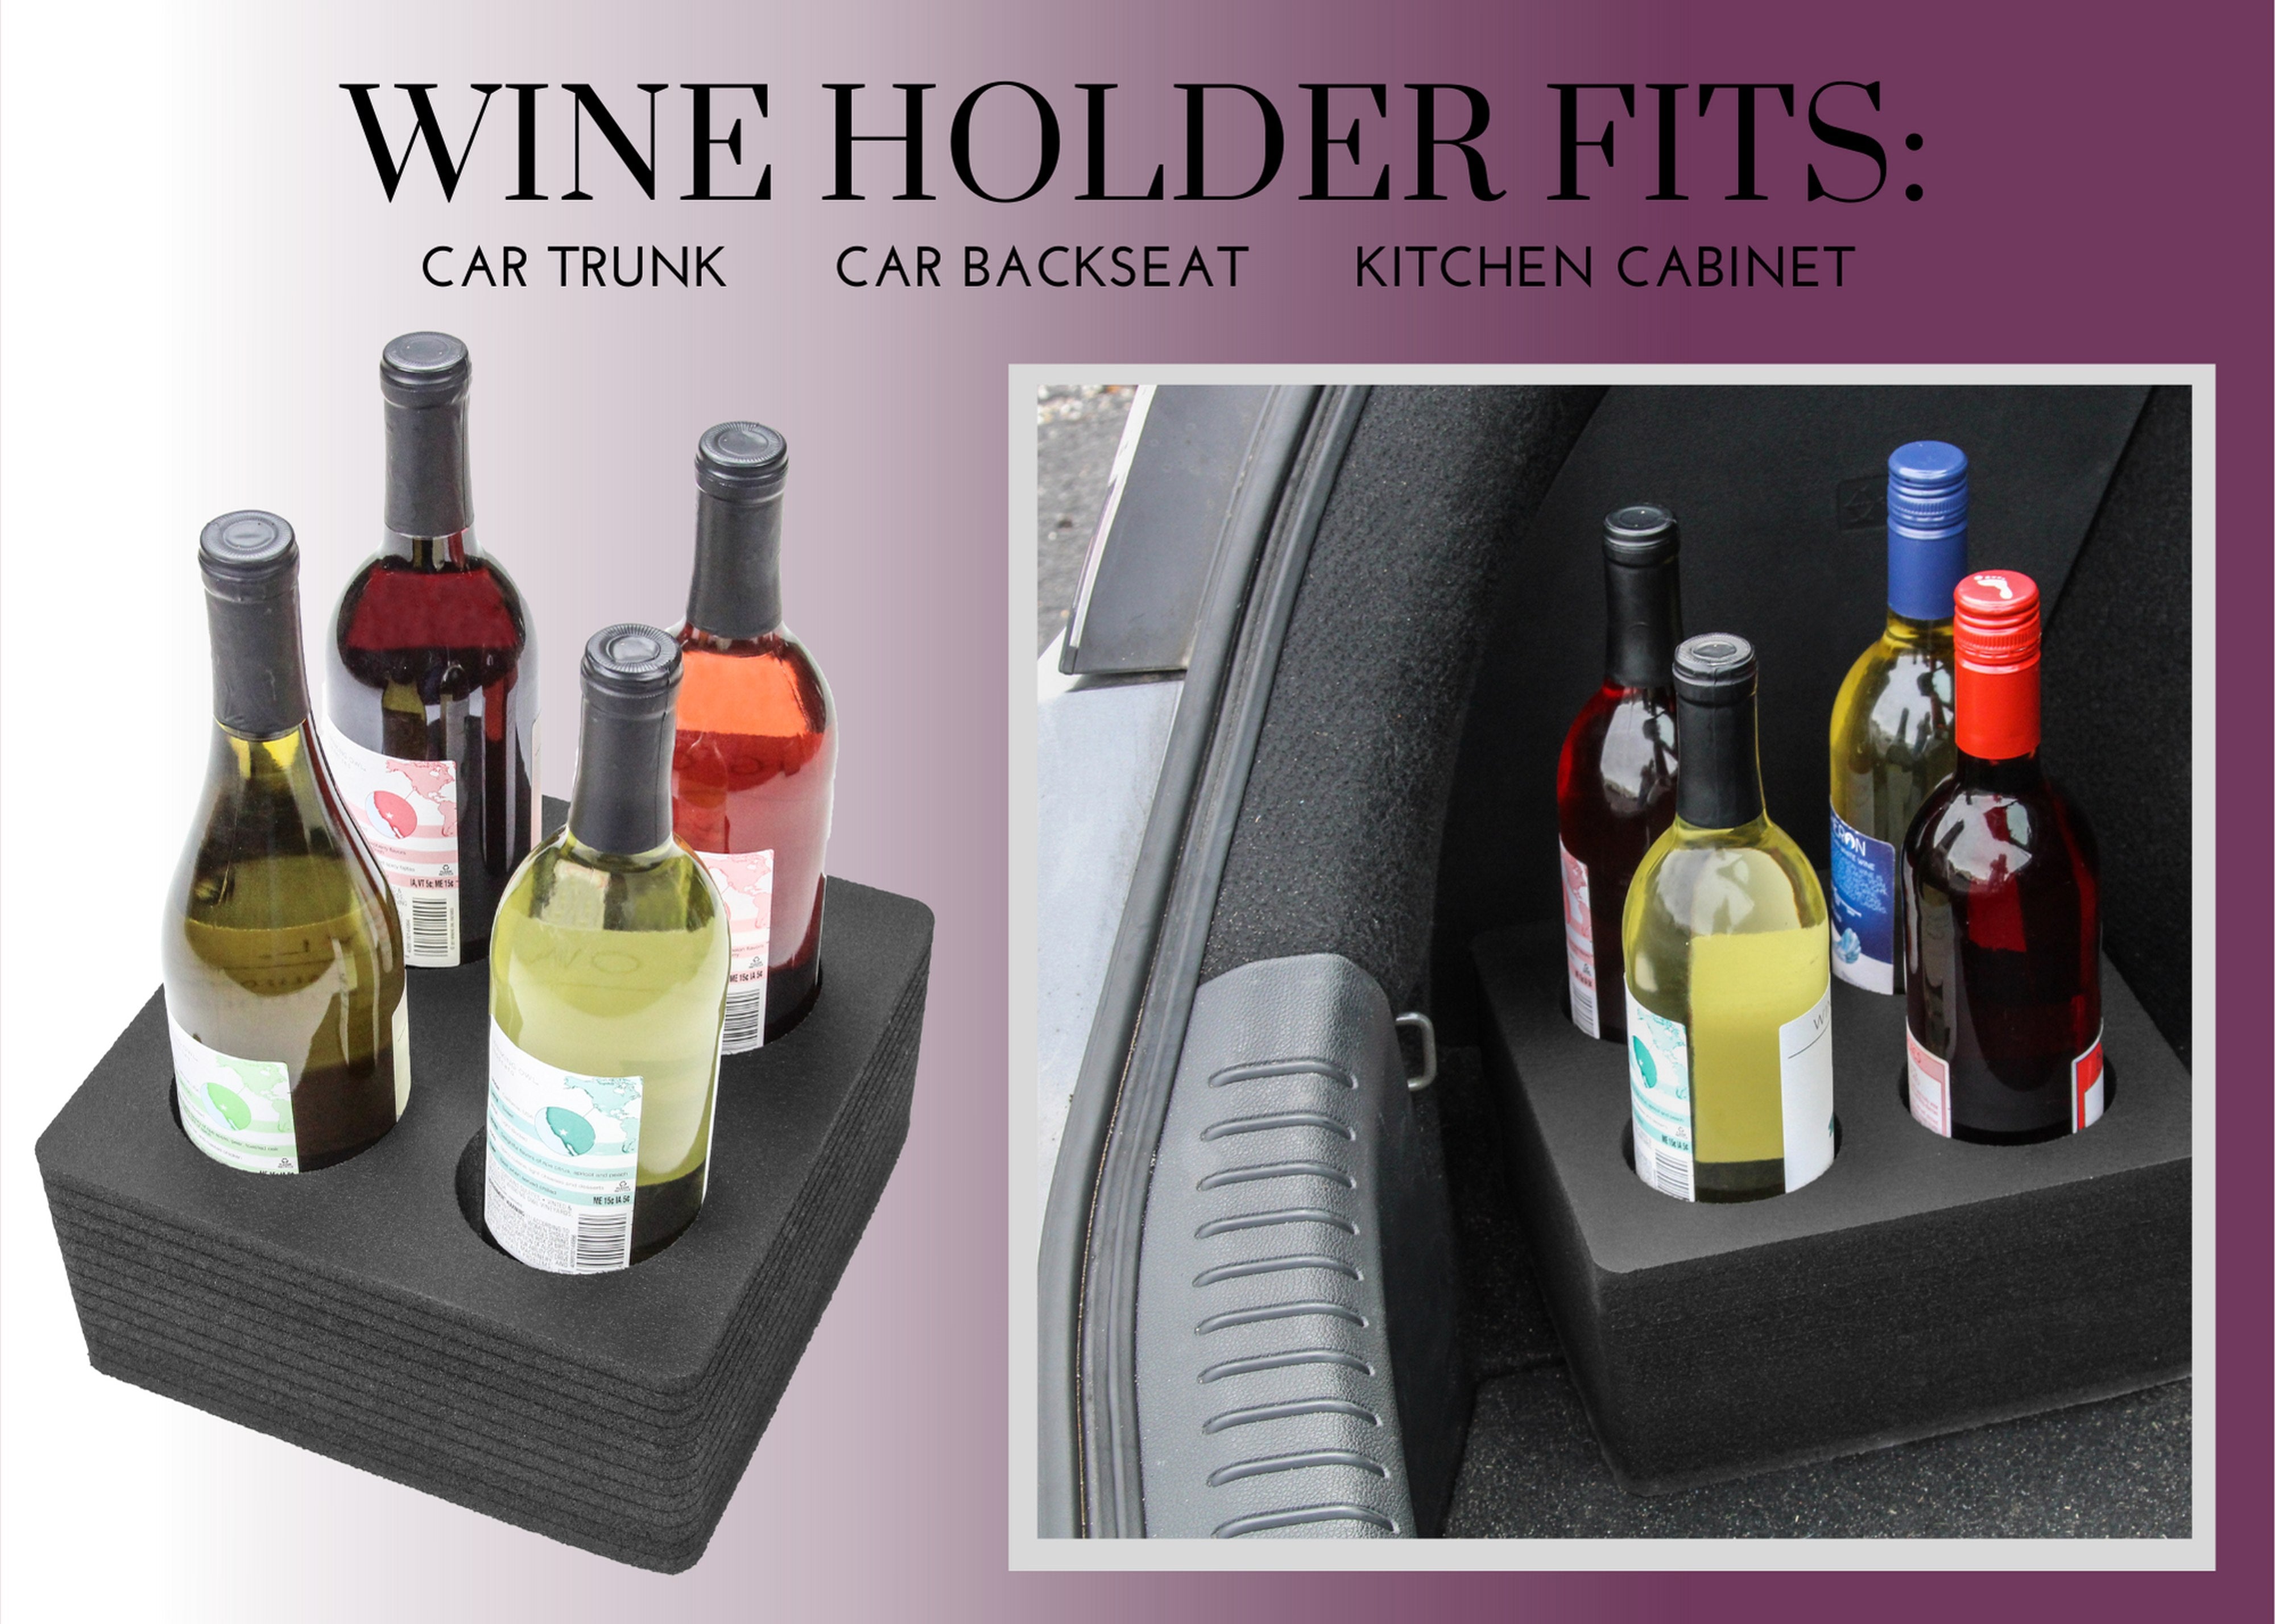 Wine Holder Durable Foam Organizer Transport Protector Packer Bottle Car Truck SUV Van Seat Travel Protection 9.5 x 9.5 x 4 Inches Holds 4 Bottles